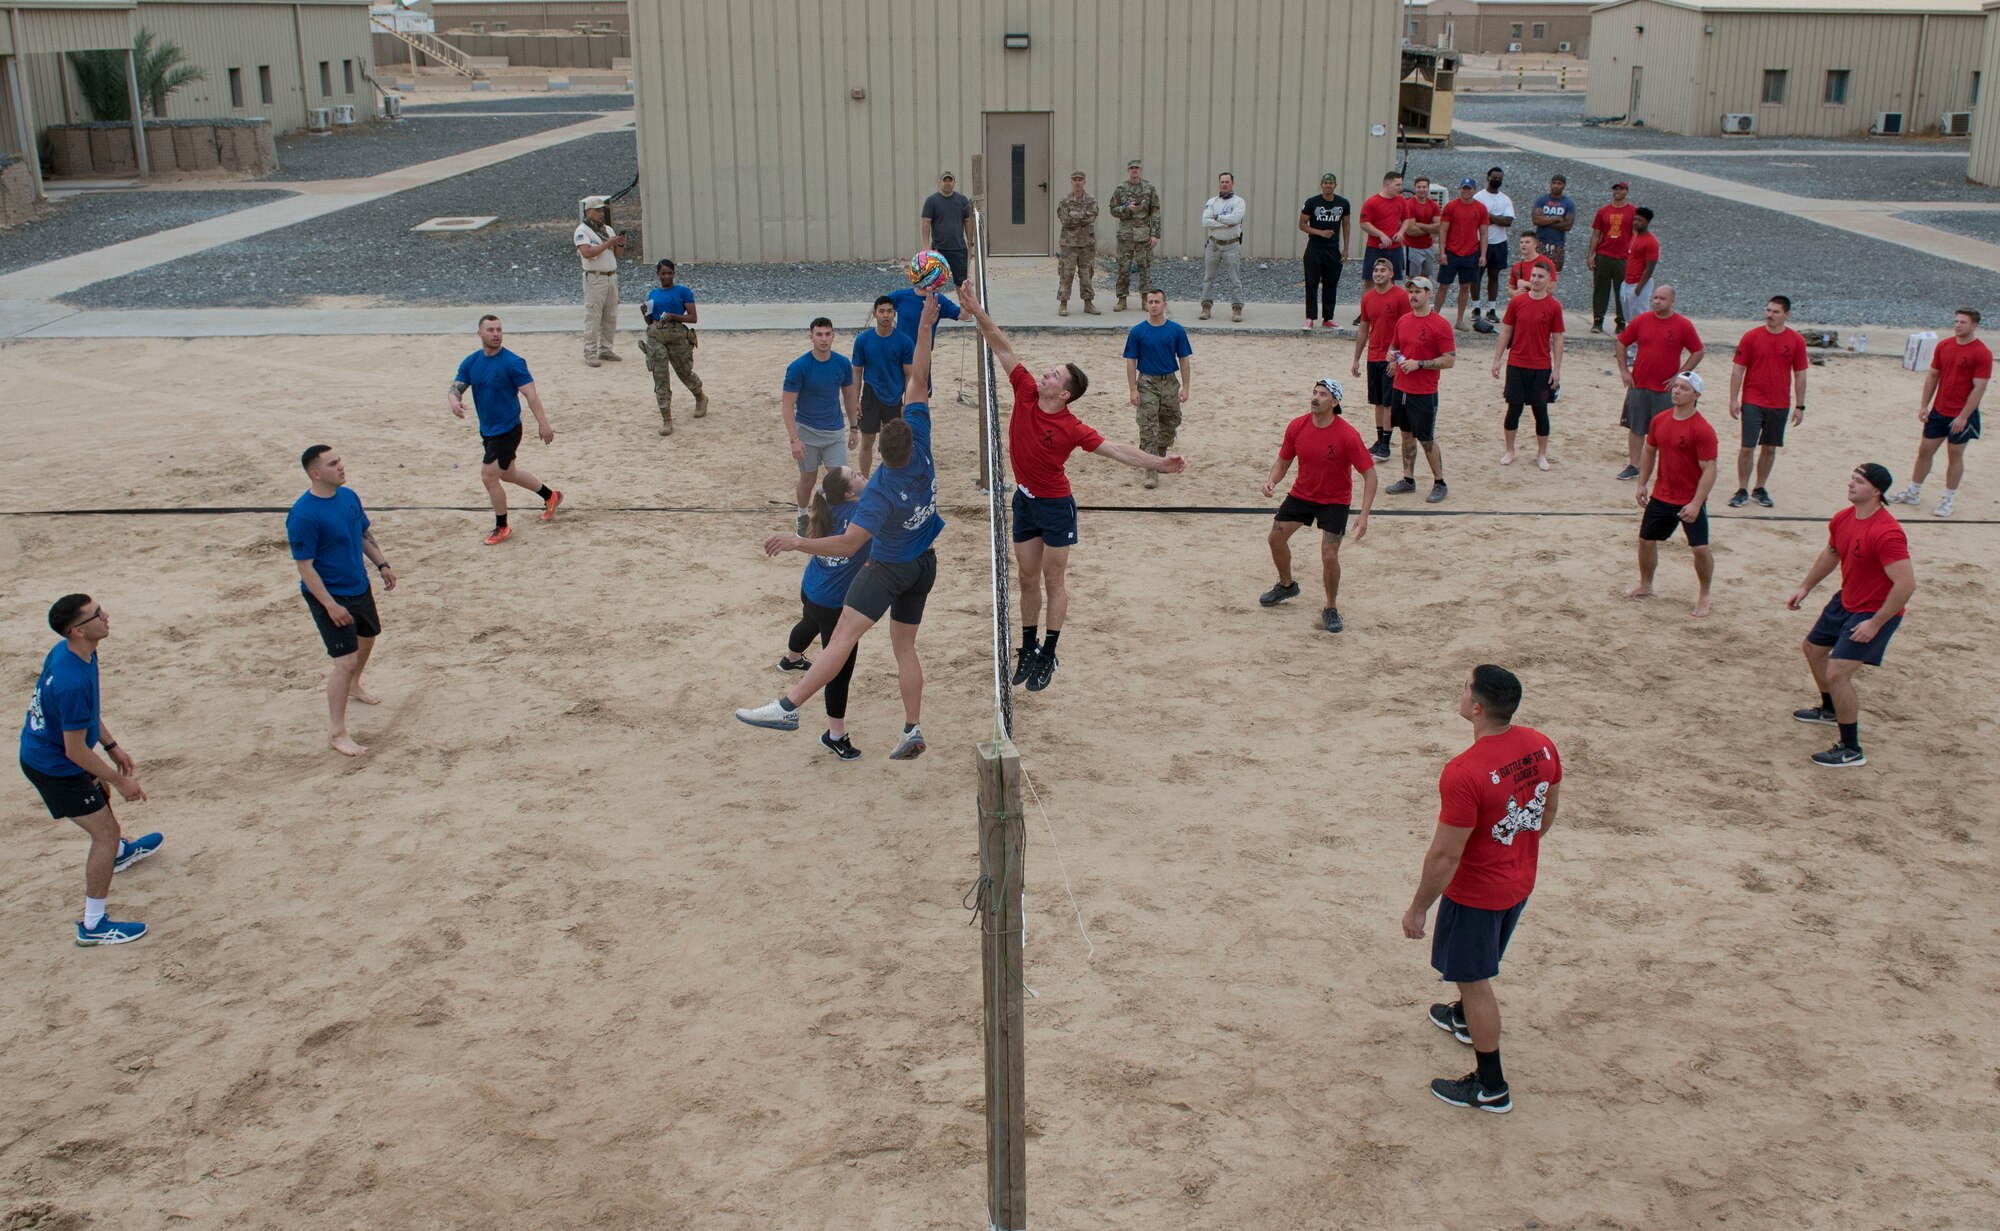 U.S. Air Force Airmen assigned to the 407th Expeditionary Security Forces Squadron and the 407th Expeditionary Civil Engineer Squadron play volleyball during the Battle of the Badges event at Ahmed Al Jaber Air Base, Kuwait, Nov. 11, 2020.